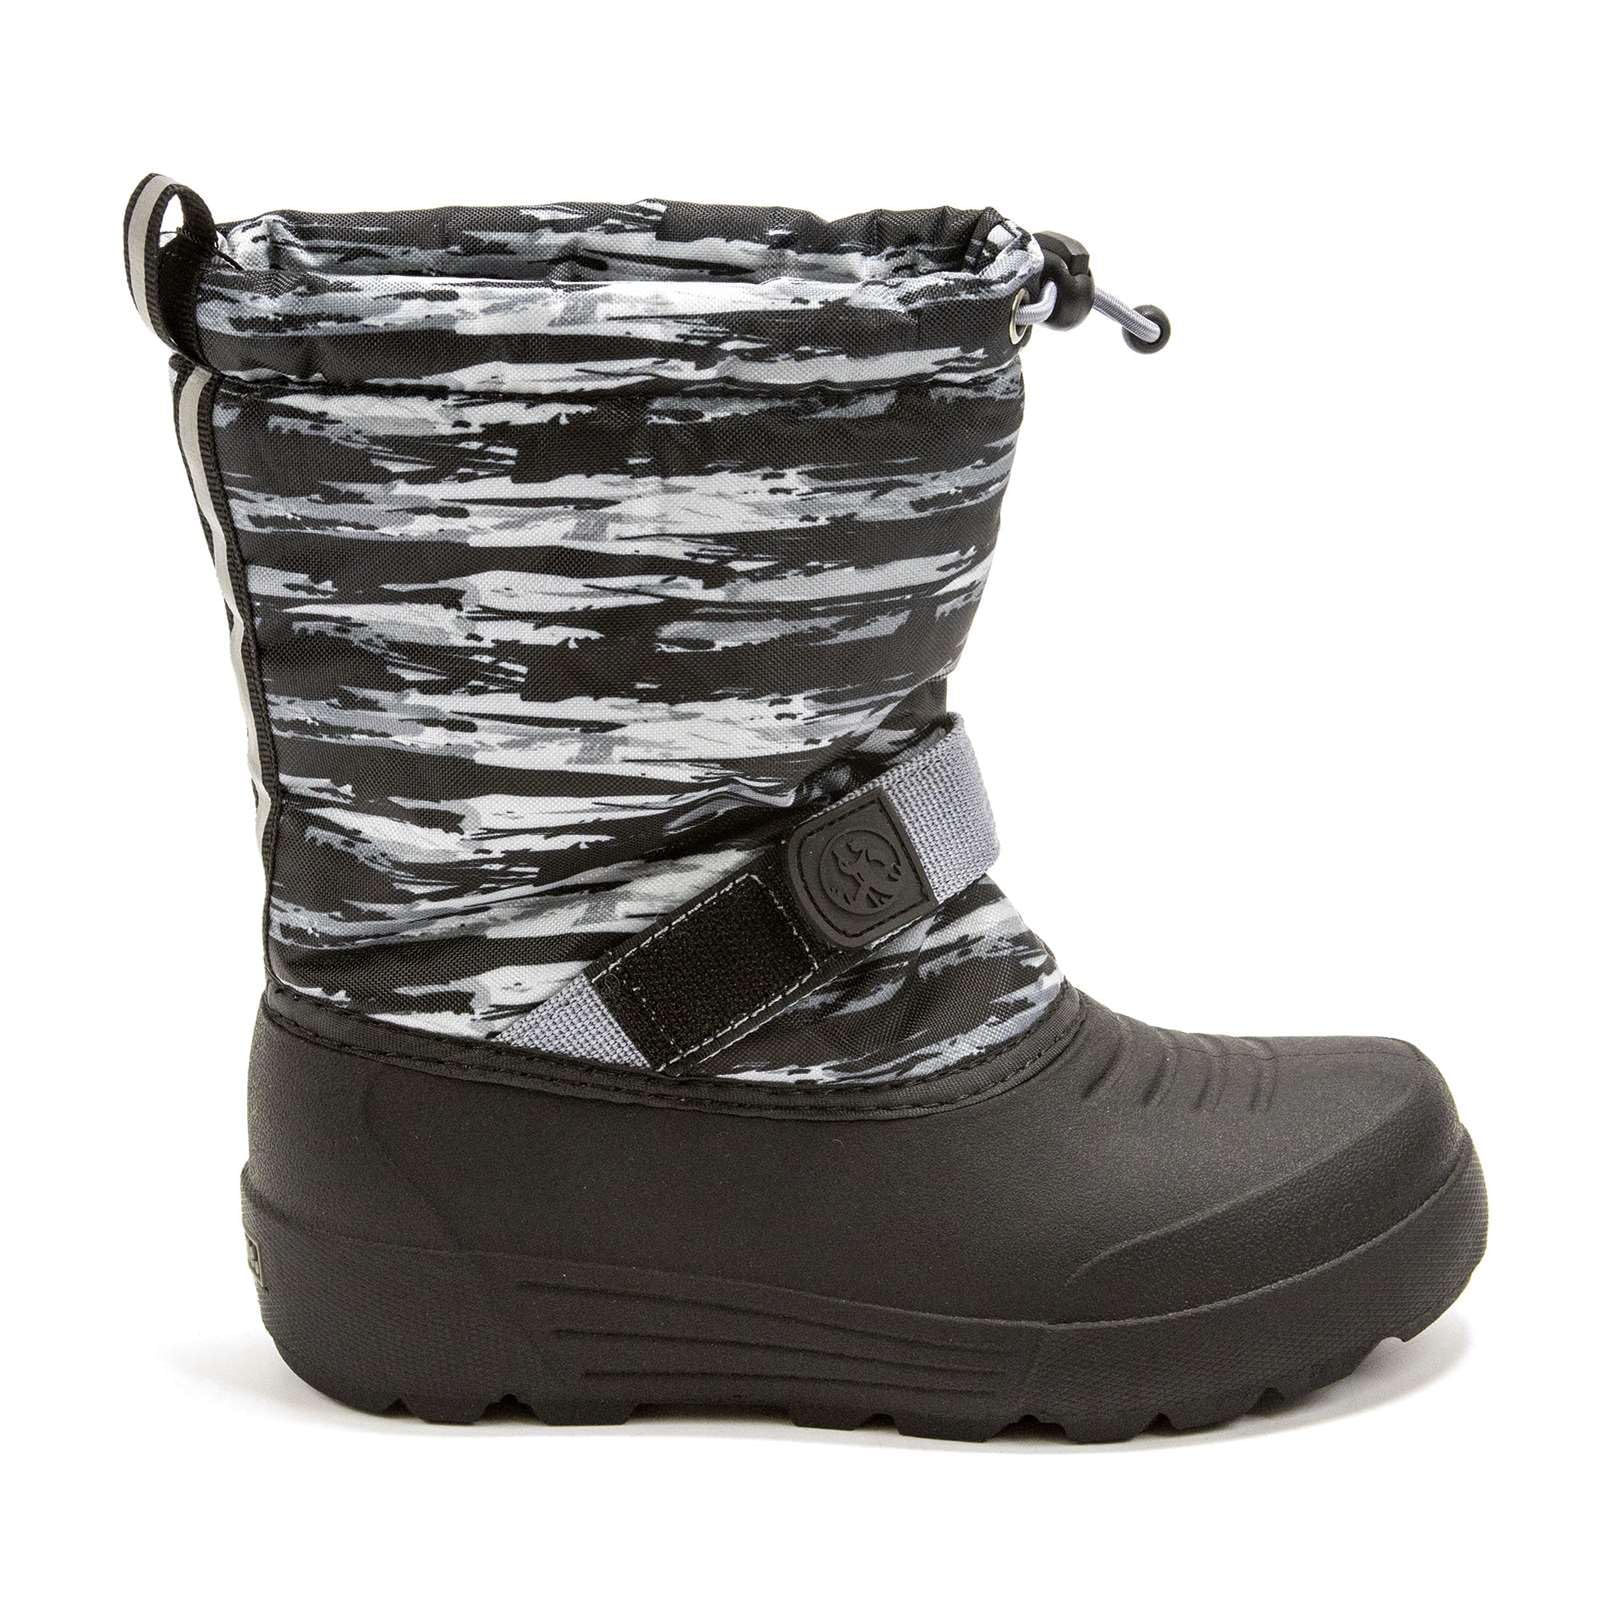 Northside Toddlers Frosty Insulated Snow Boot, Charcoal Black,5 M US